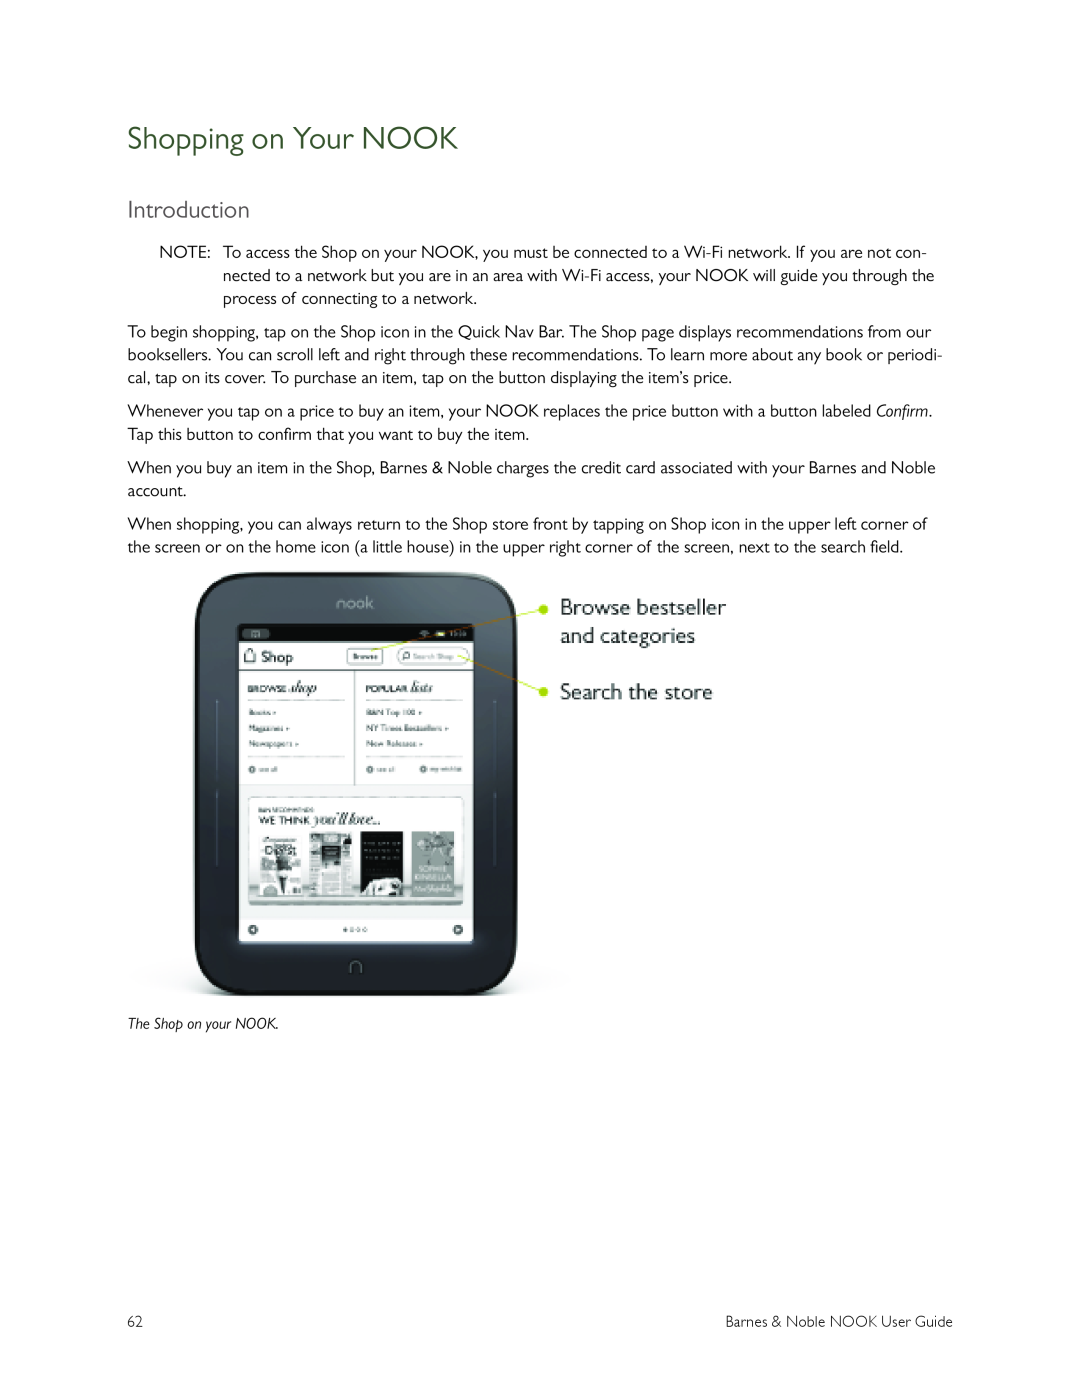 Barnes & Noble BNRV300 manual Shopping on Your NOOK, Introduction 